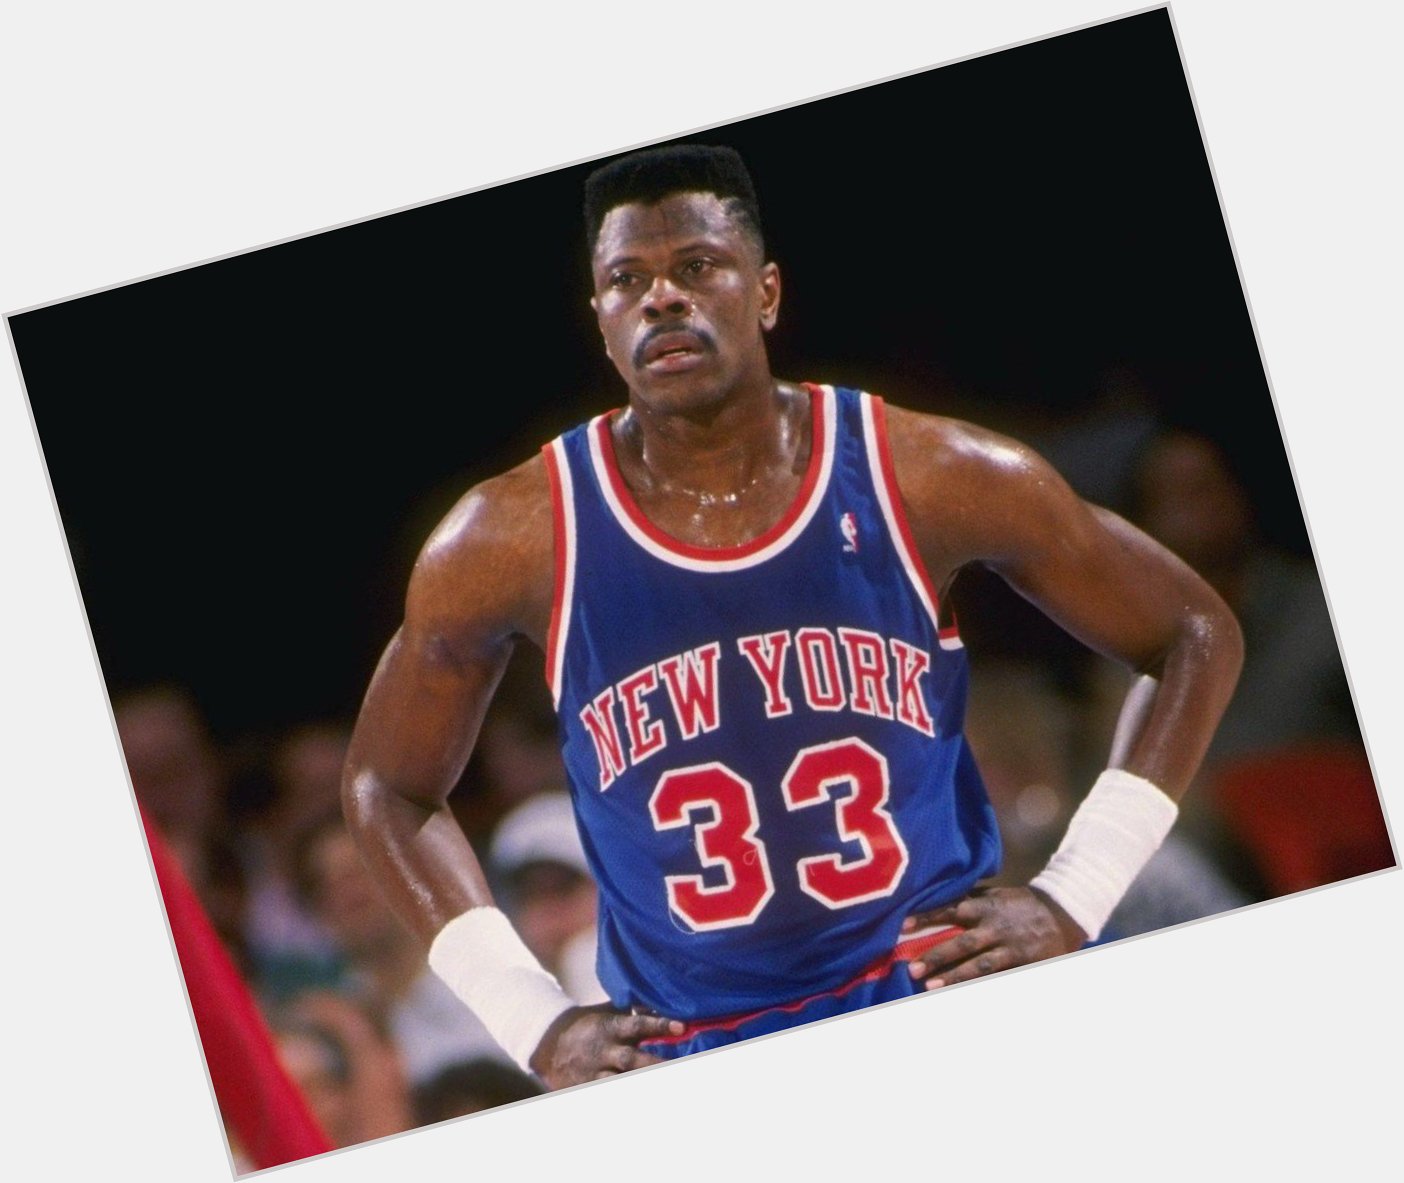 Happy Birthday to 11x All-Star & current Associate Head Coach of the Patrick Ewing!  